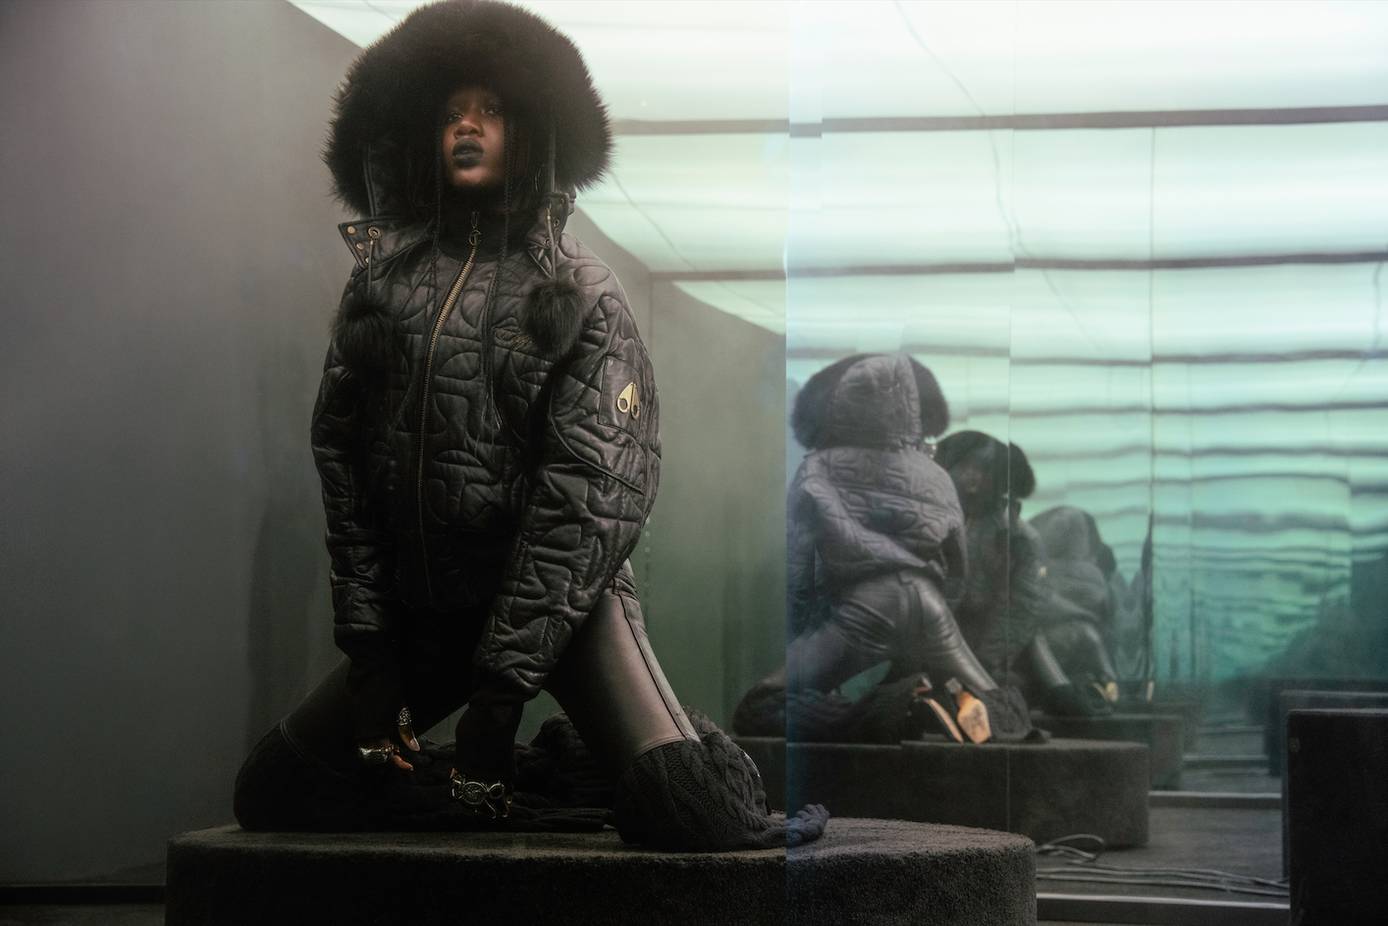 An IRL Telfar Store Is Coming to New York City This Year